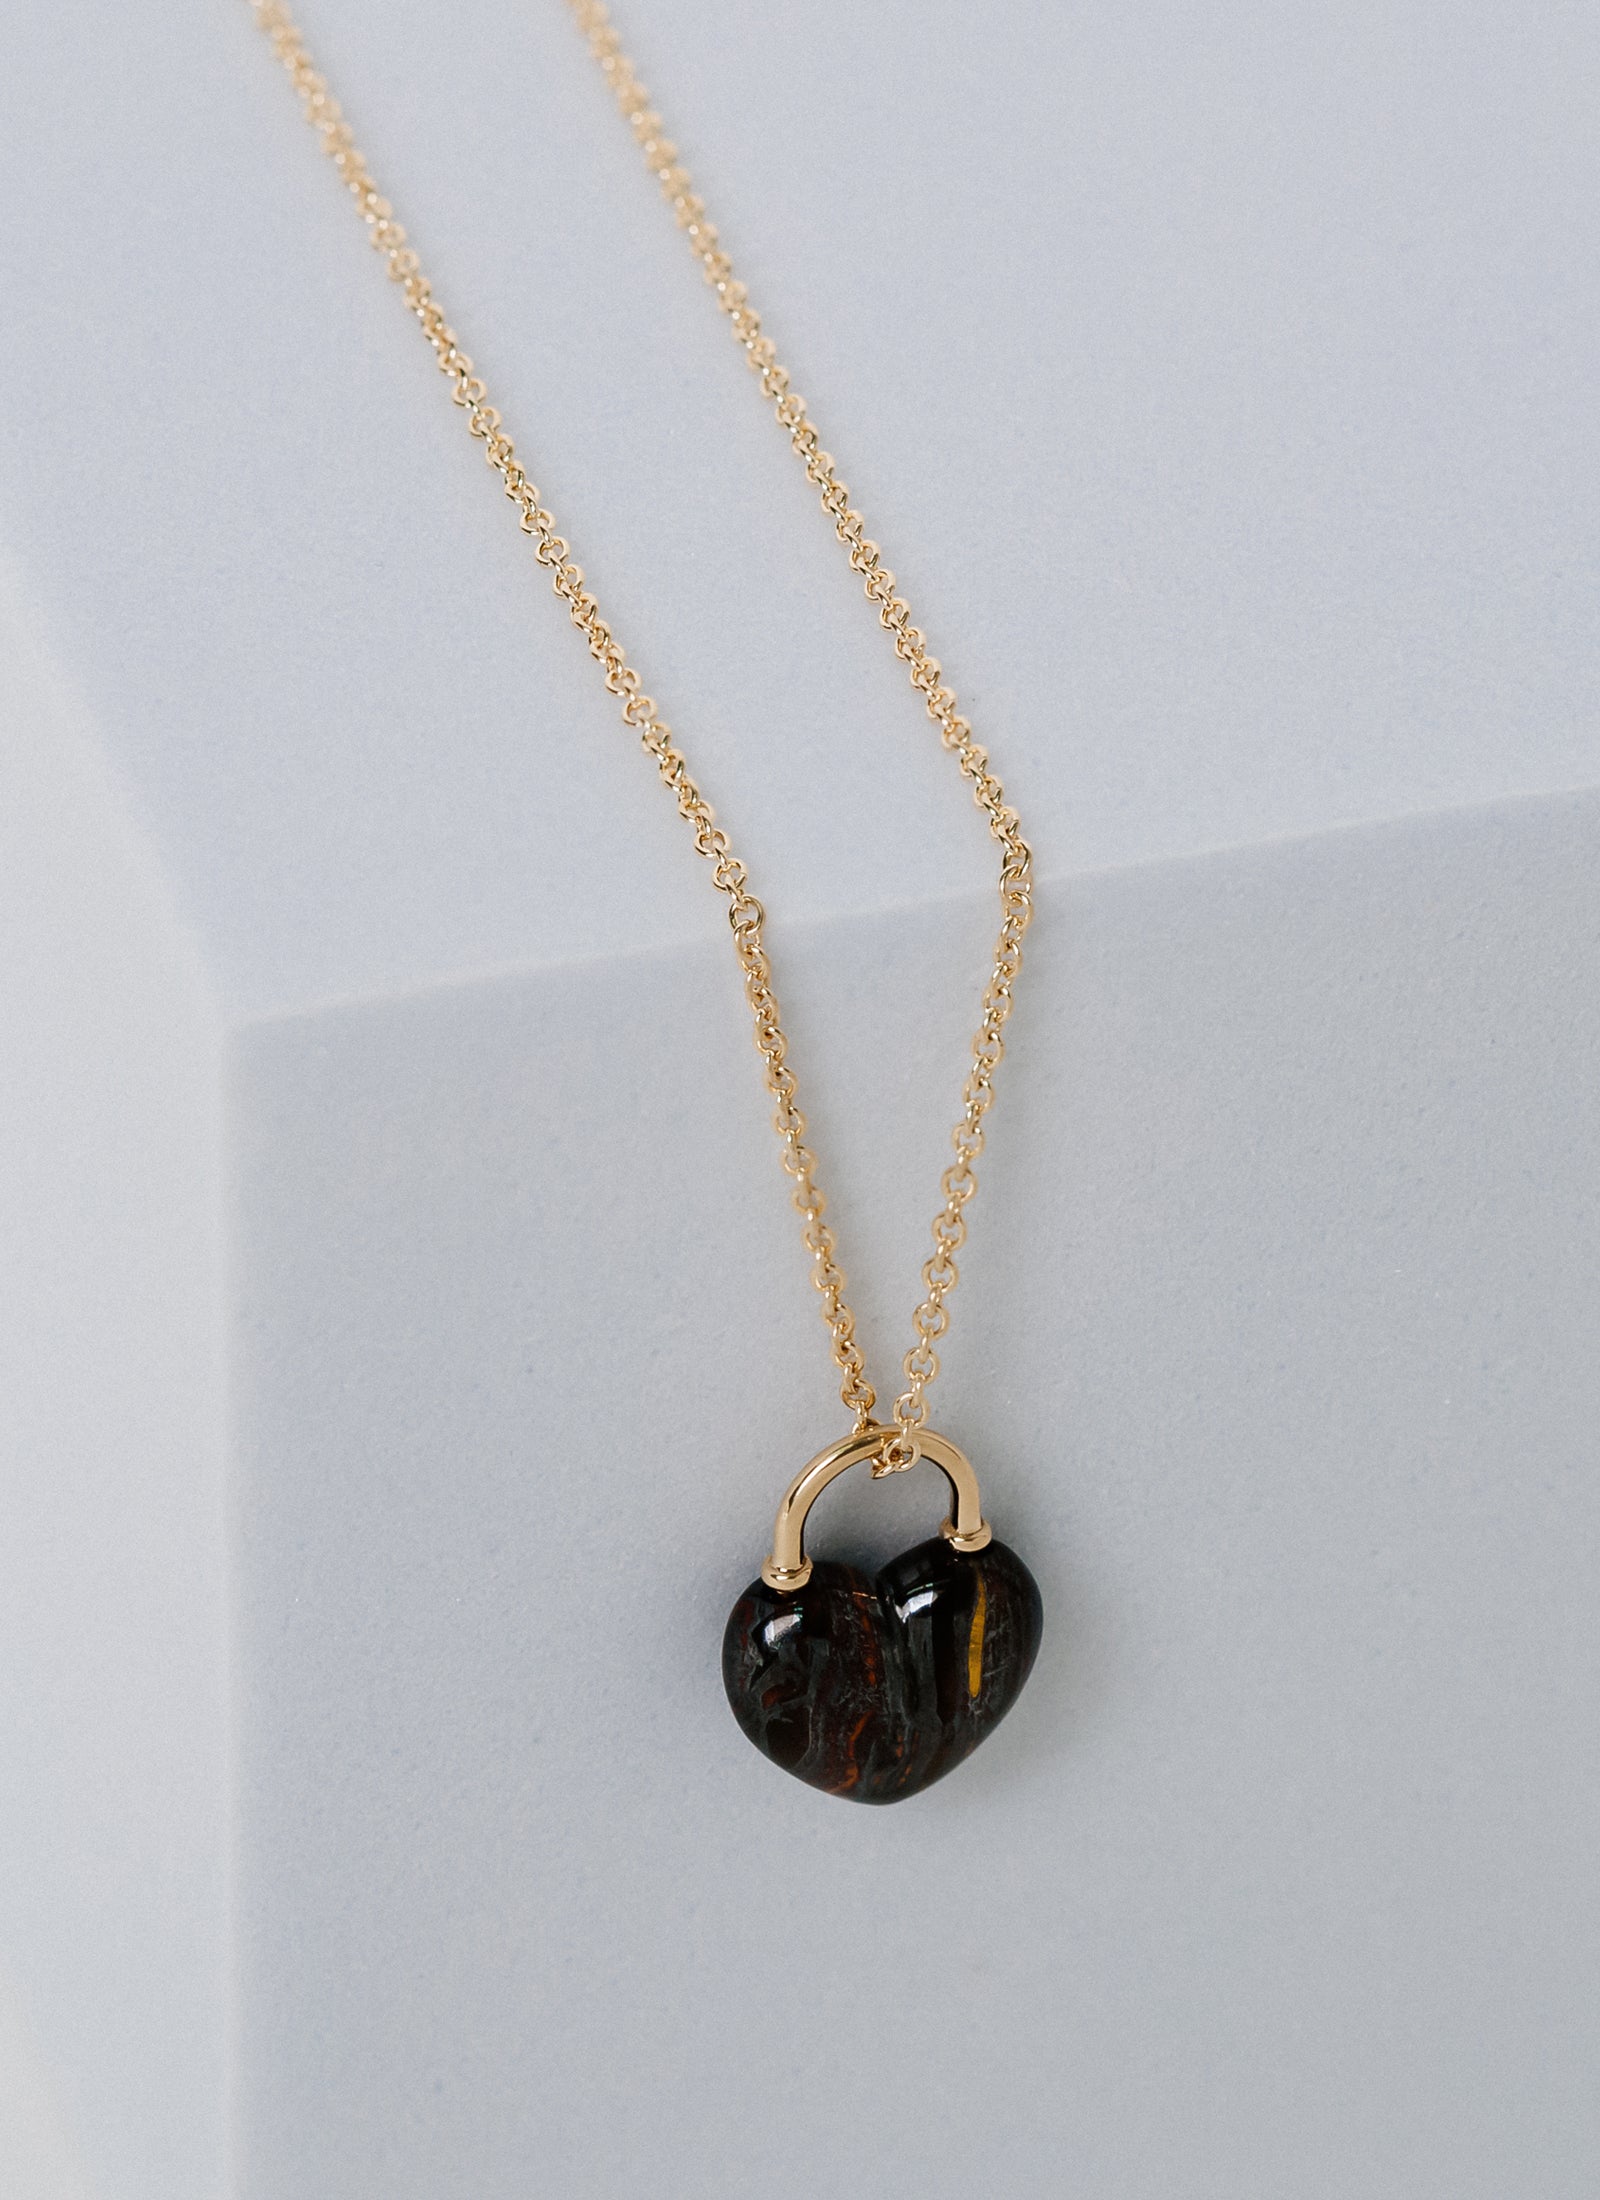 Limited Edition Tiger's Eye Heart Lock Pendant Necklace from RIVA